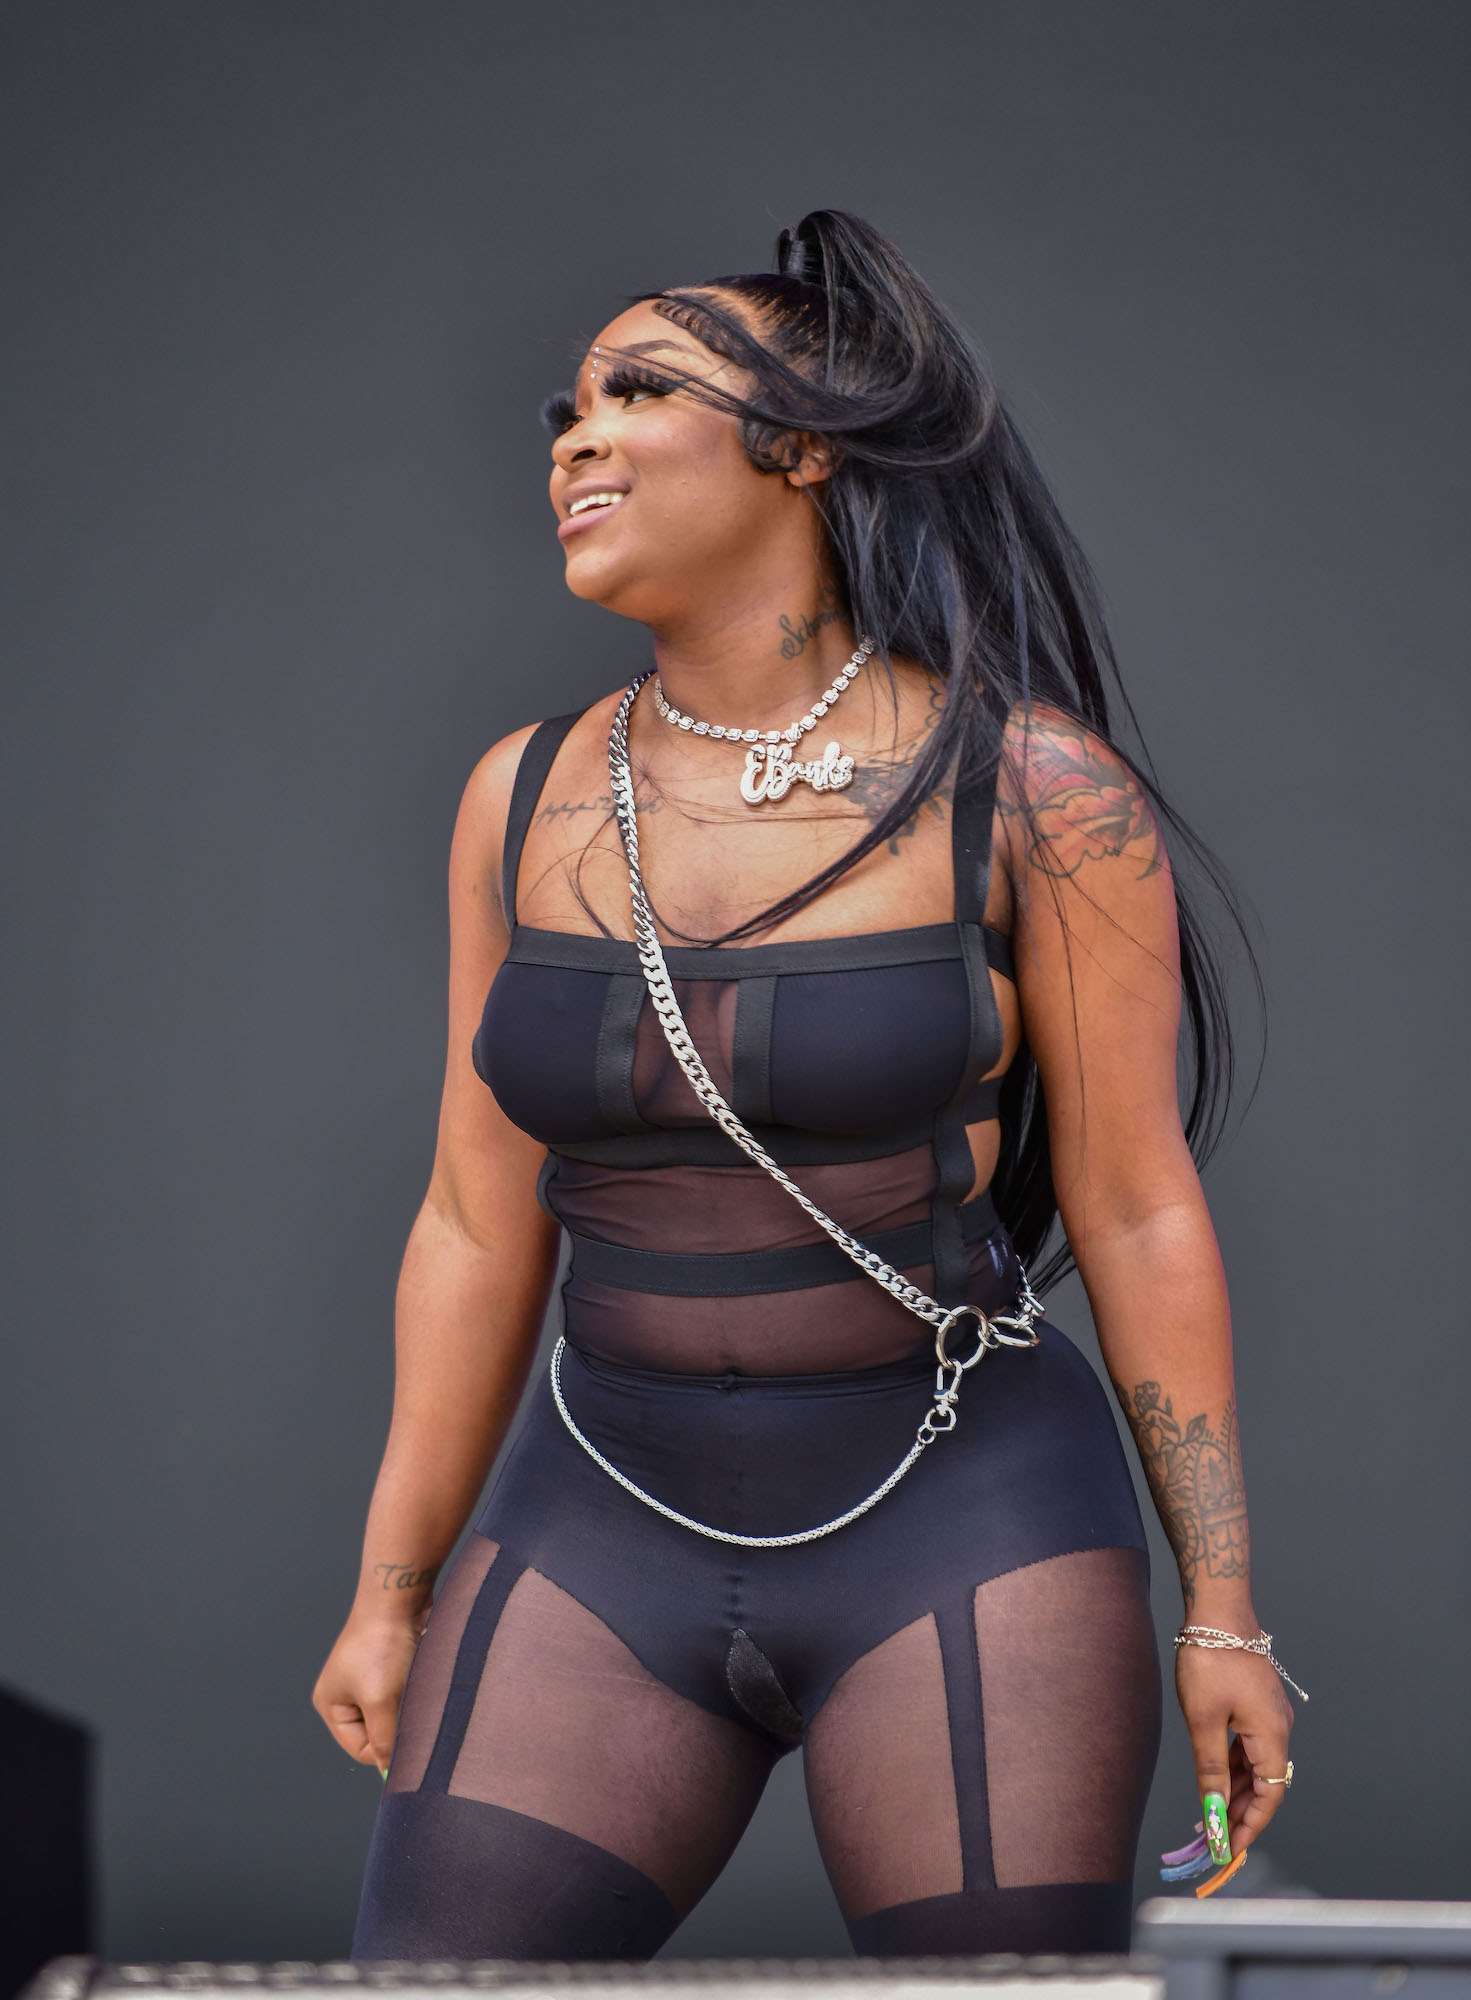 Erica Banks Live at Lollapalooza [GALLERY] 3